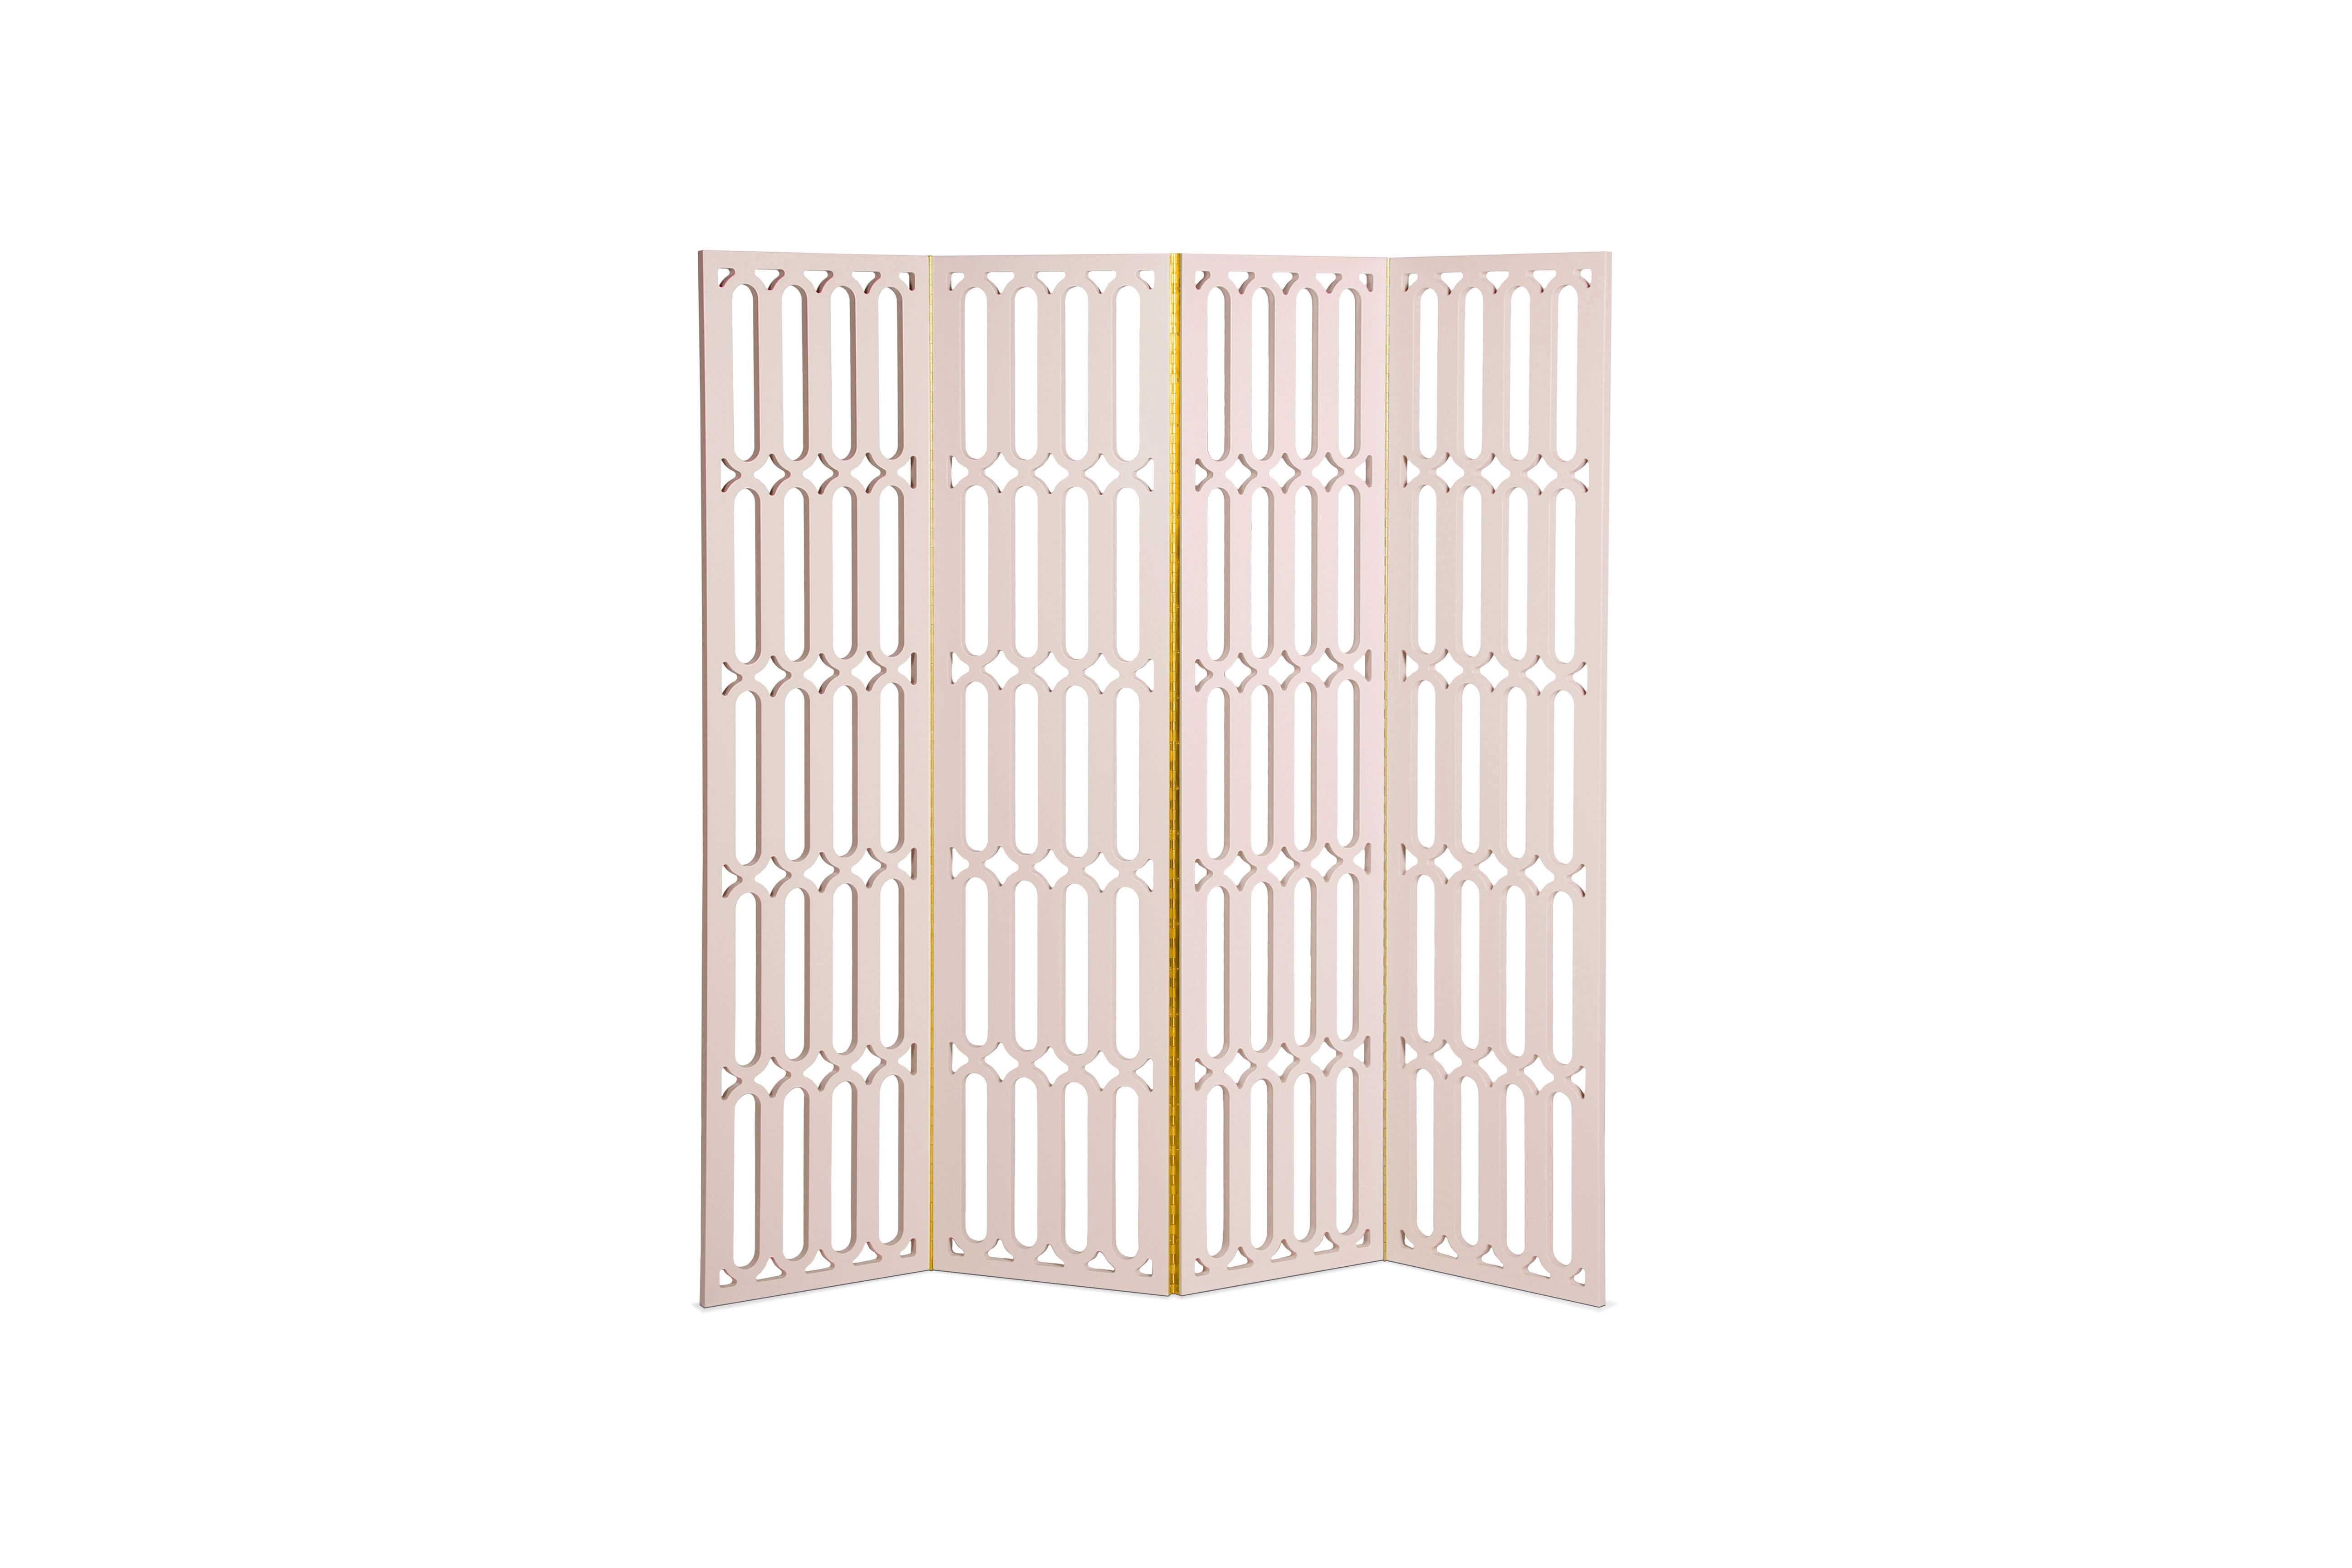 Marshmallow folding screen by Royal Stranger
Dimensions: 165 x 3 x 168 cm
Materials: Lacquered wood with matte finish. Polished brass.

The Marshmallow Folding Screen is inspired by the glorious Art Deco decade and the Roaring Twenties. With a